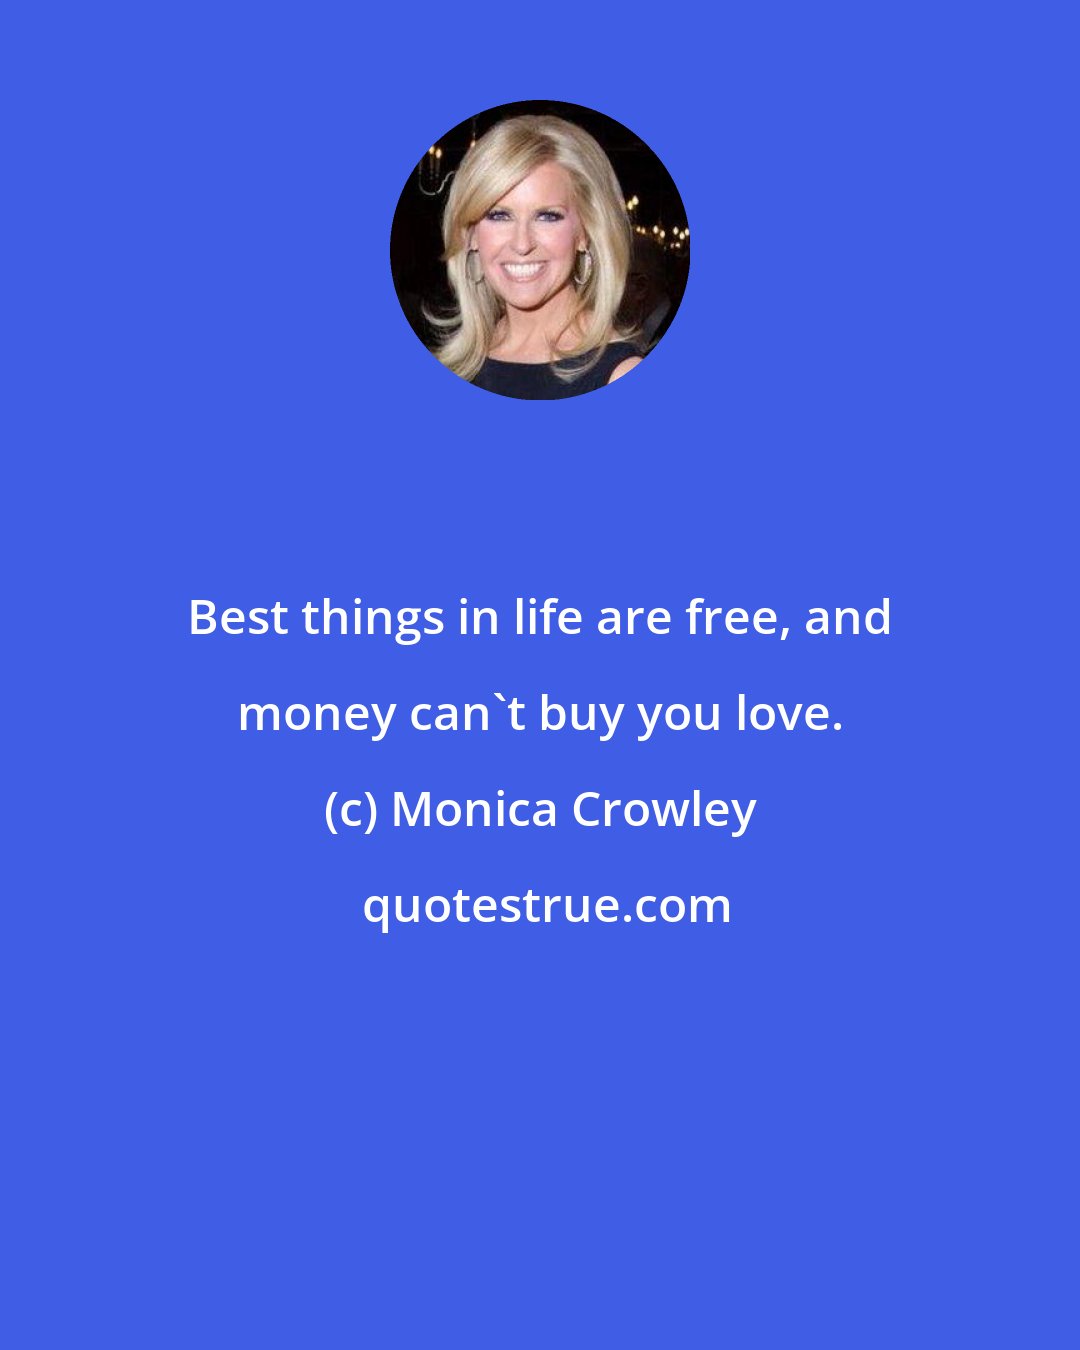 Monica Crowley: Best things in life are free, and money can't buy you love.